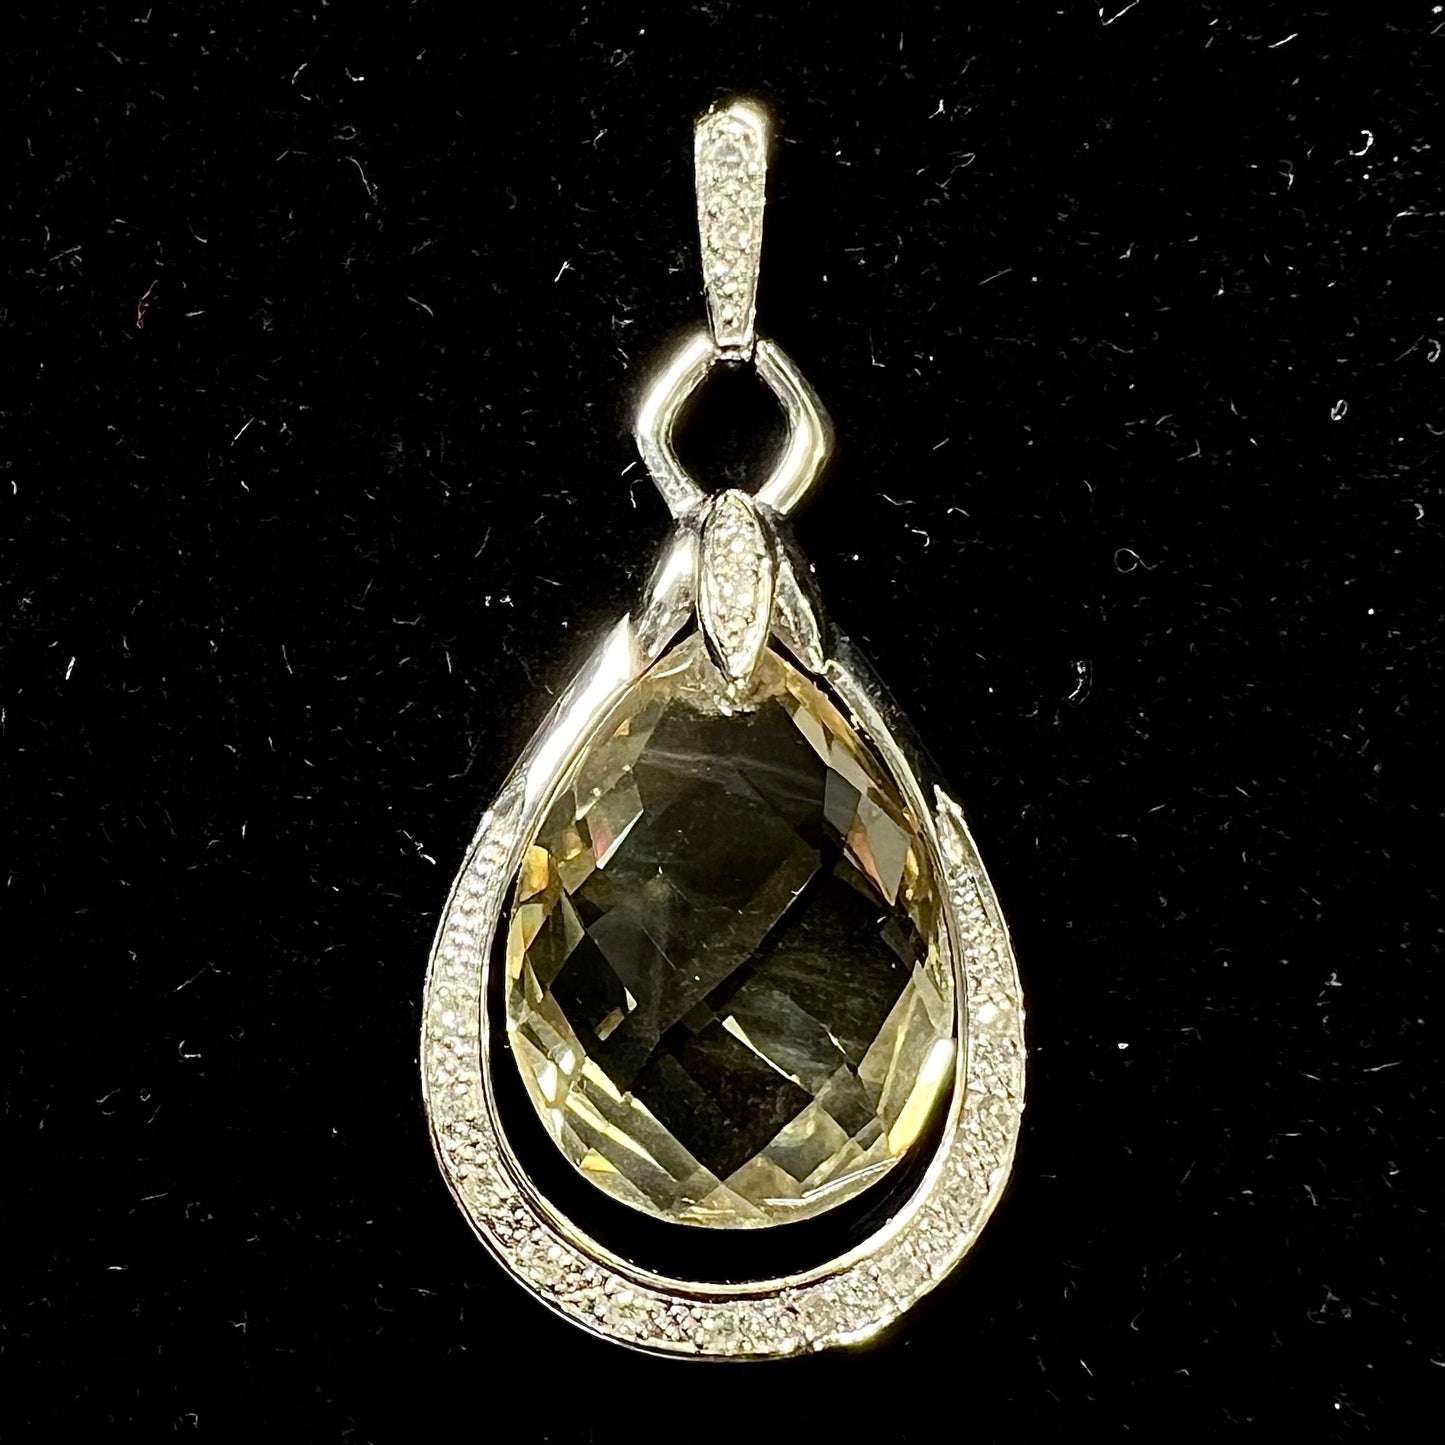 A ladies' white gold pendant set with diamonds and a faceted brilloette cut yellowish green heliodor beryl stone.